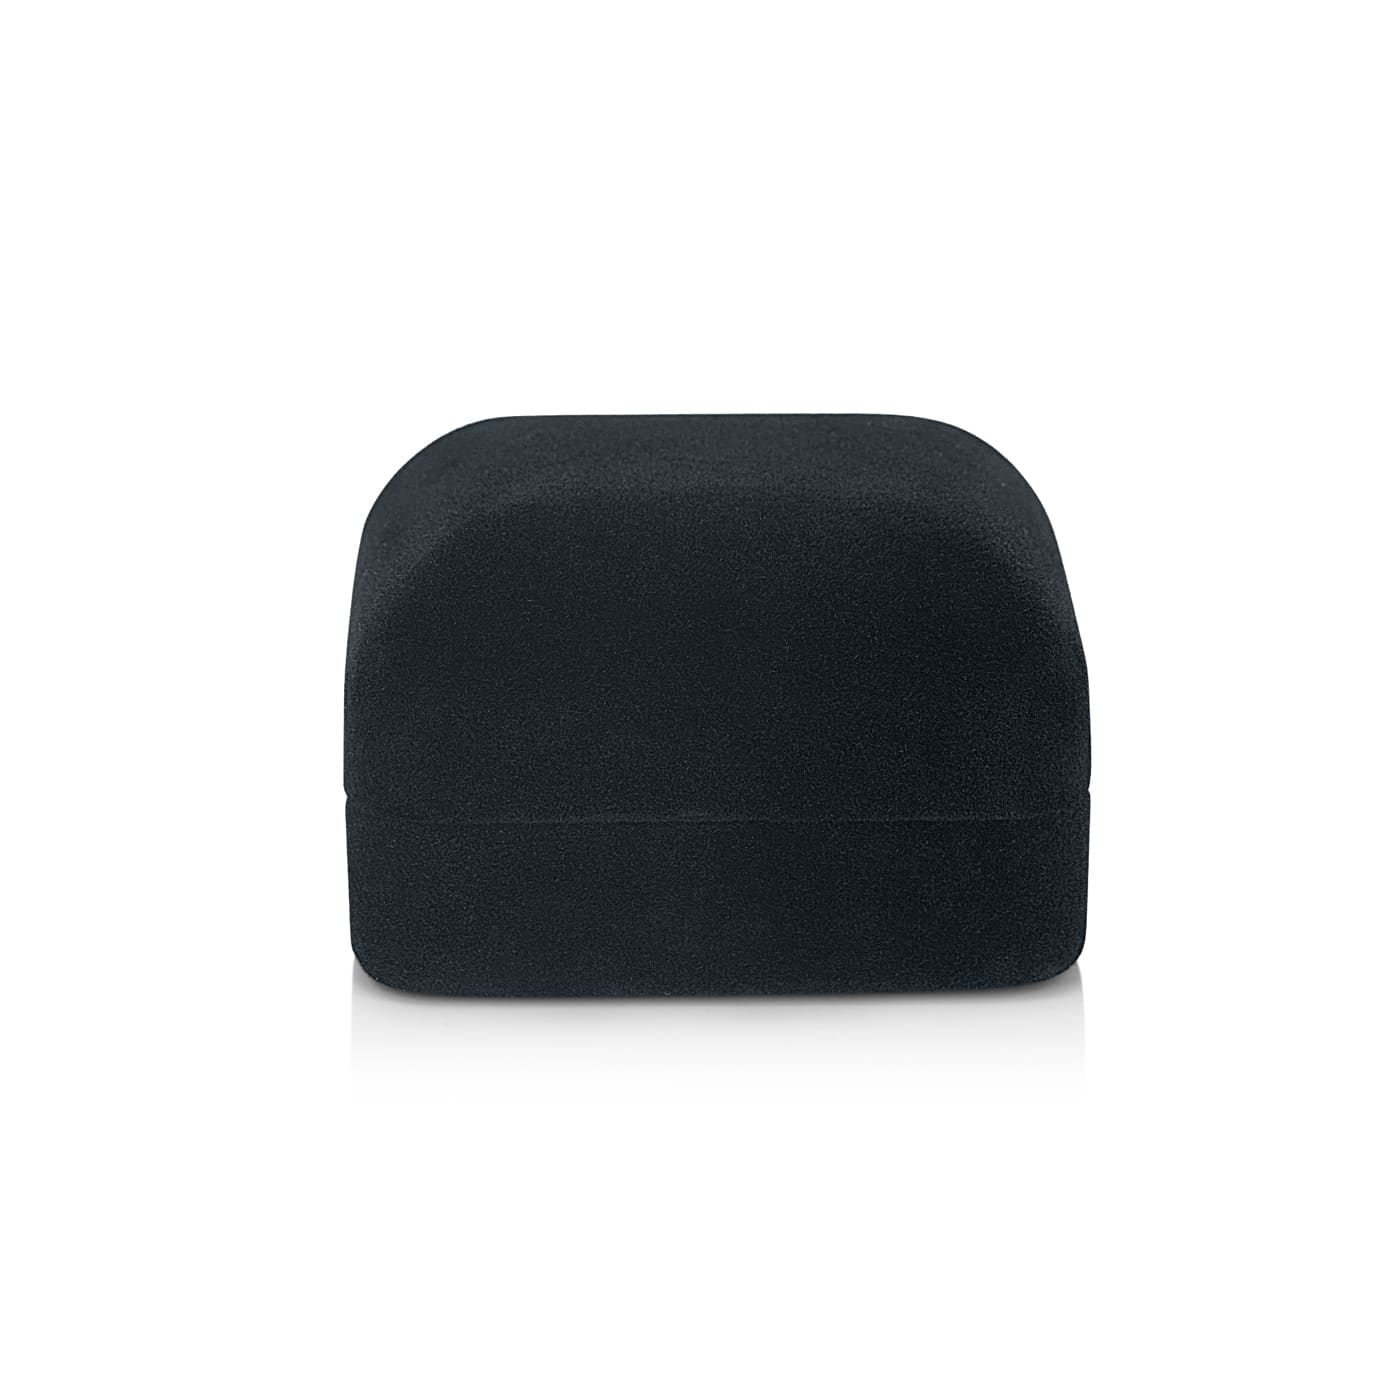 Classic Black Velvet Ring Box in closed position - Modern Gents Trading Co.